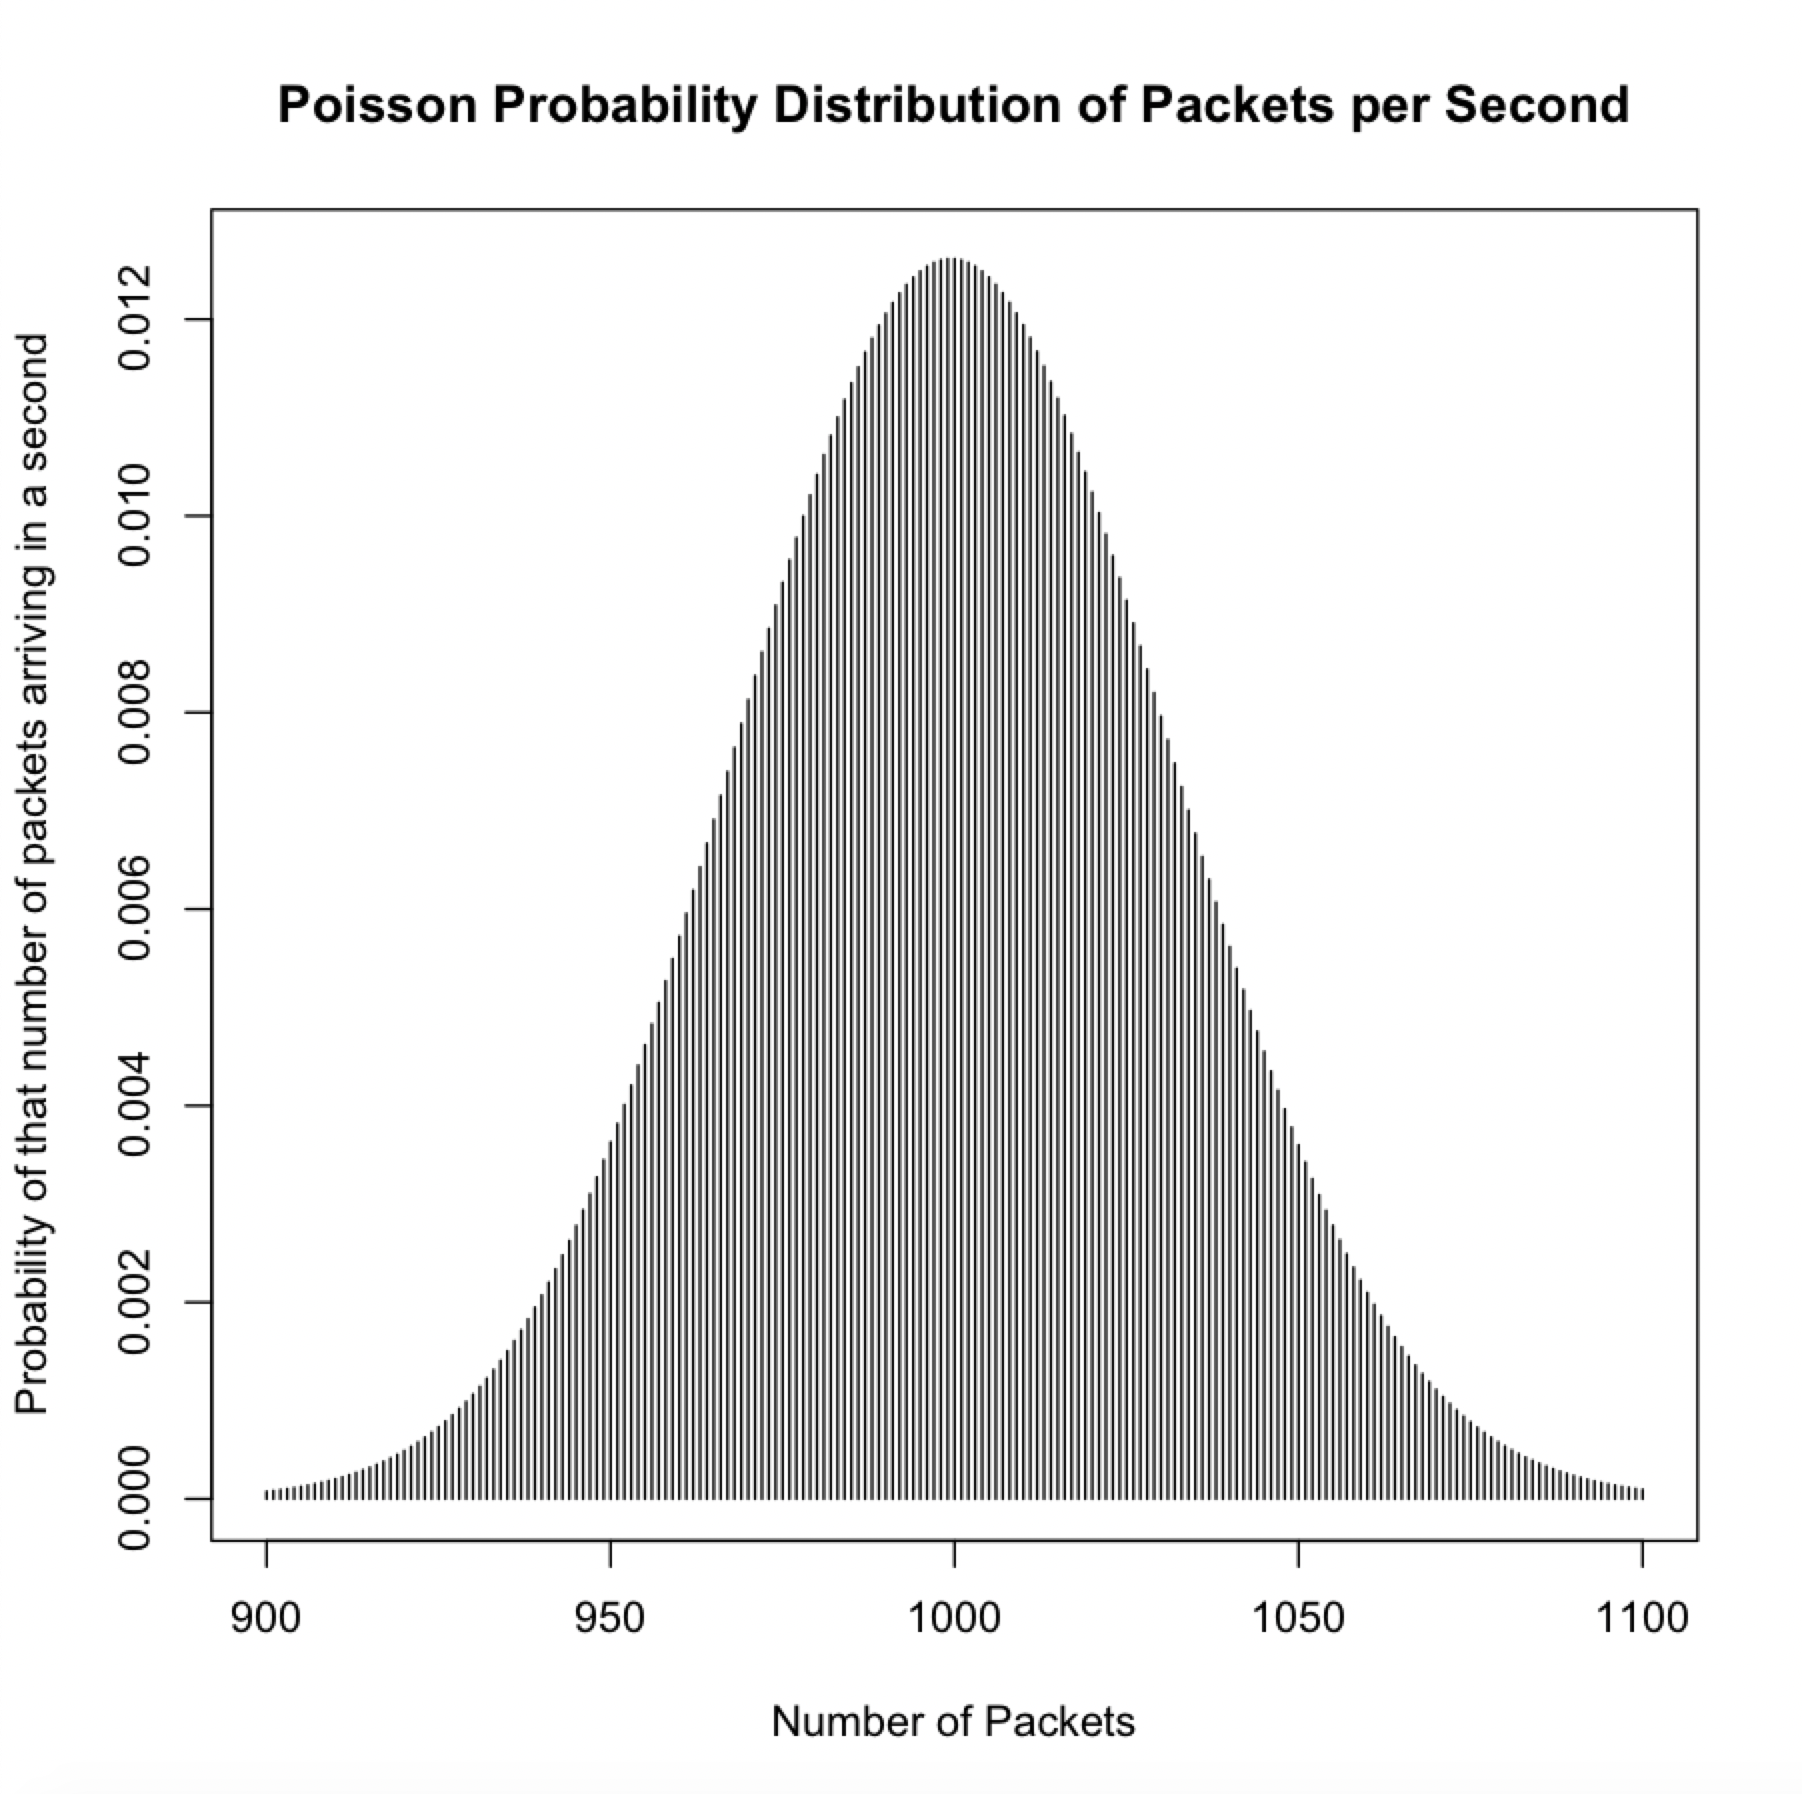 Picture of a Poisson probability distribution with average of 1000 packets per second.  It looks like of like a bell curve around 1000. The probabilities around 1000 are about 1.2% with the probabilities decreasing as you go above or below 1000. At 900 and 1100 they are close to 0.